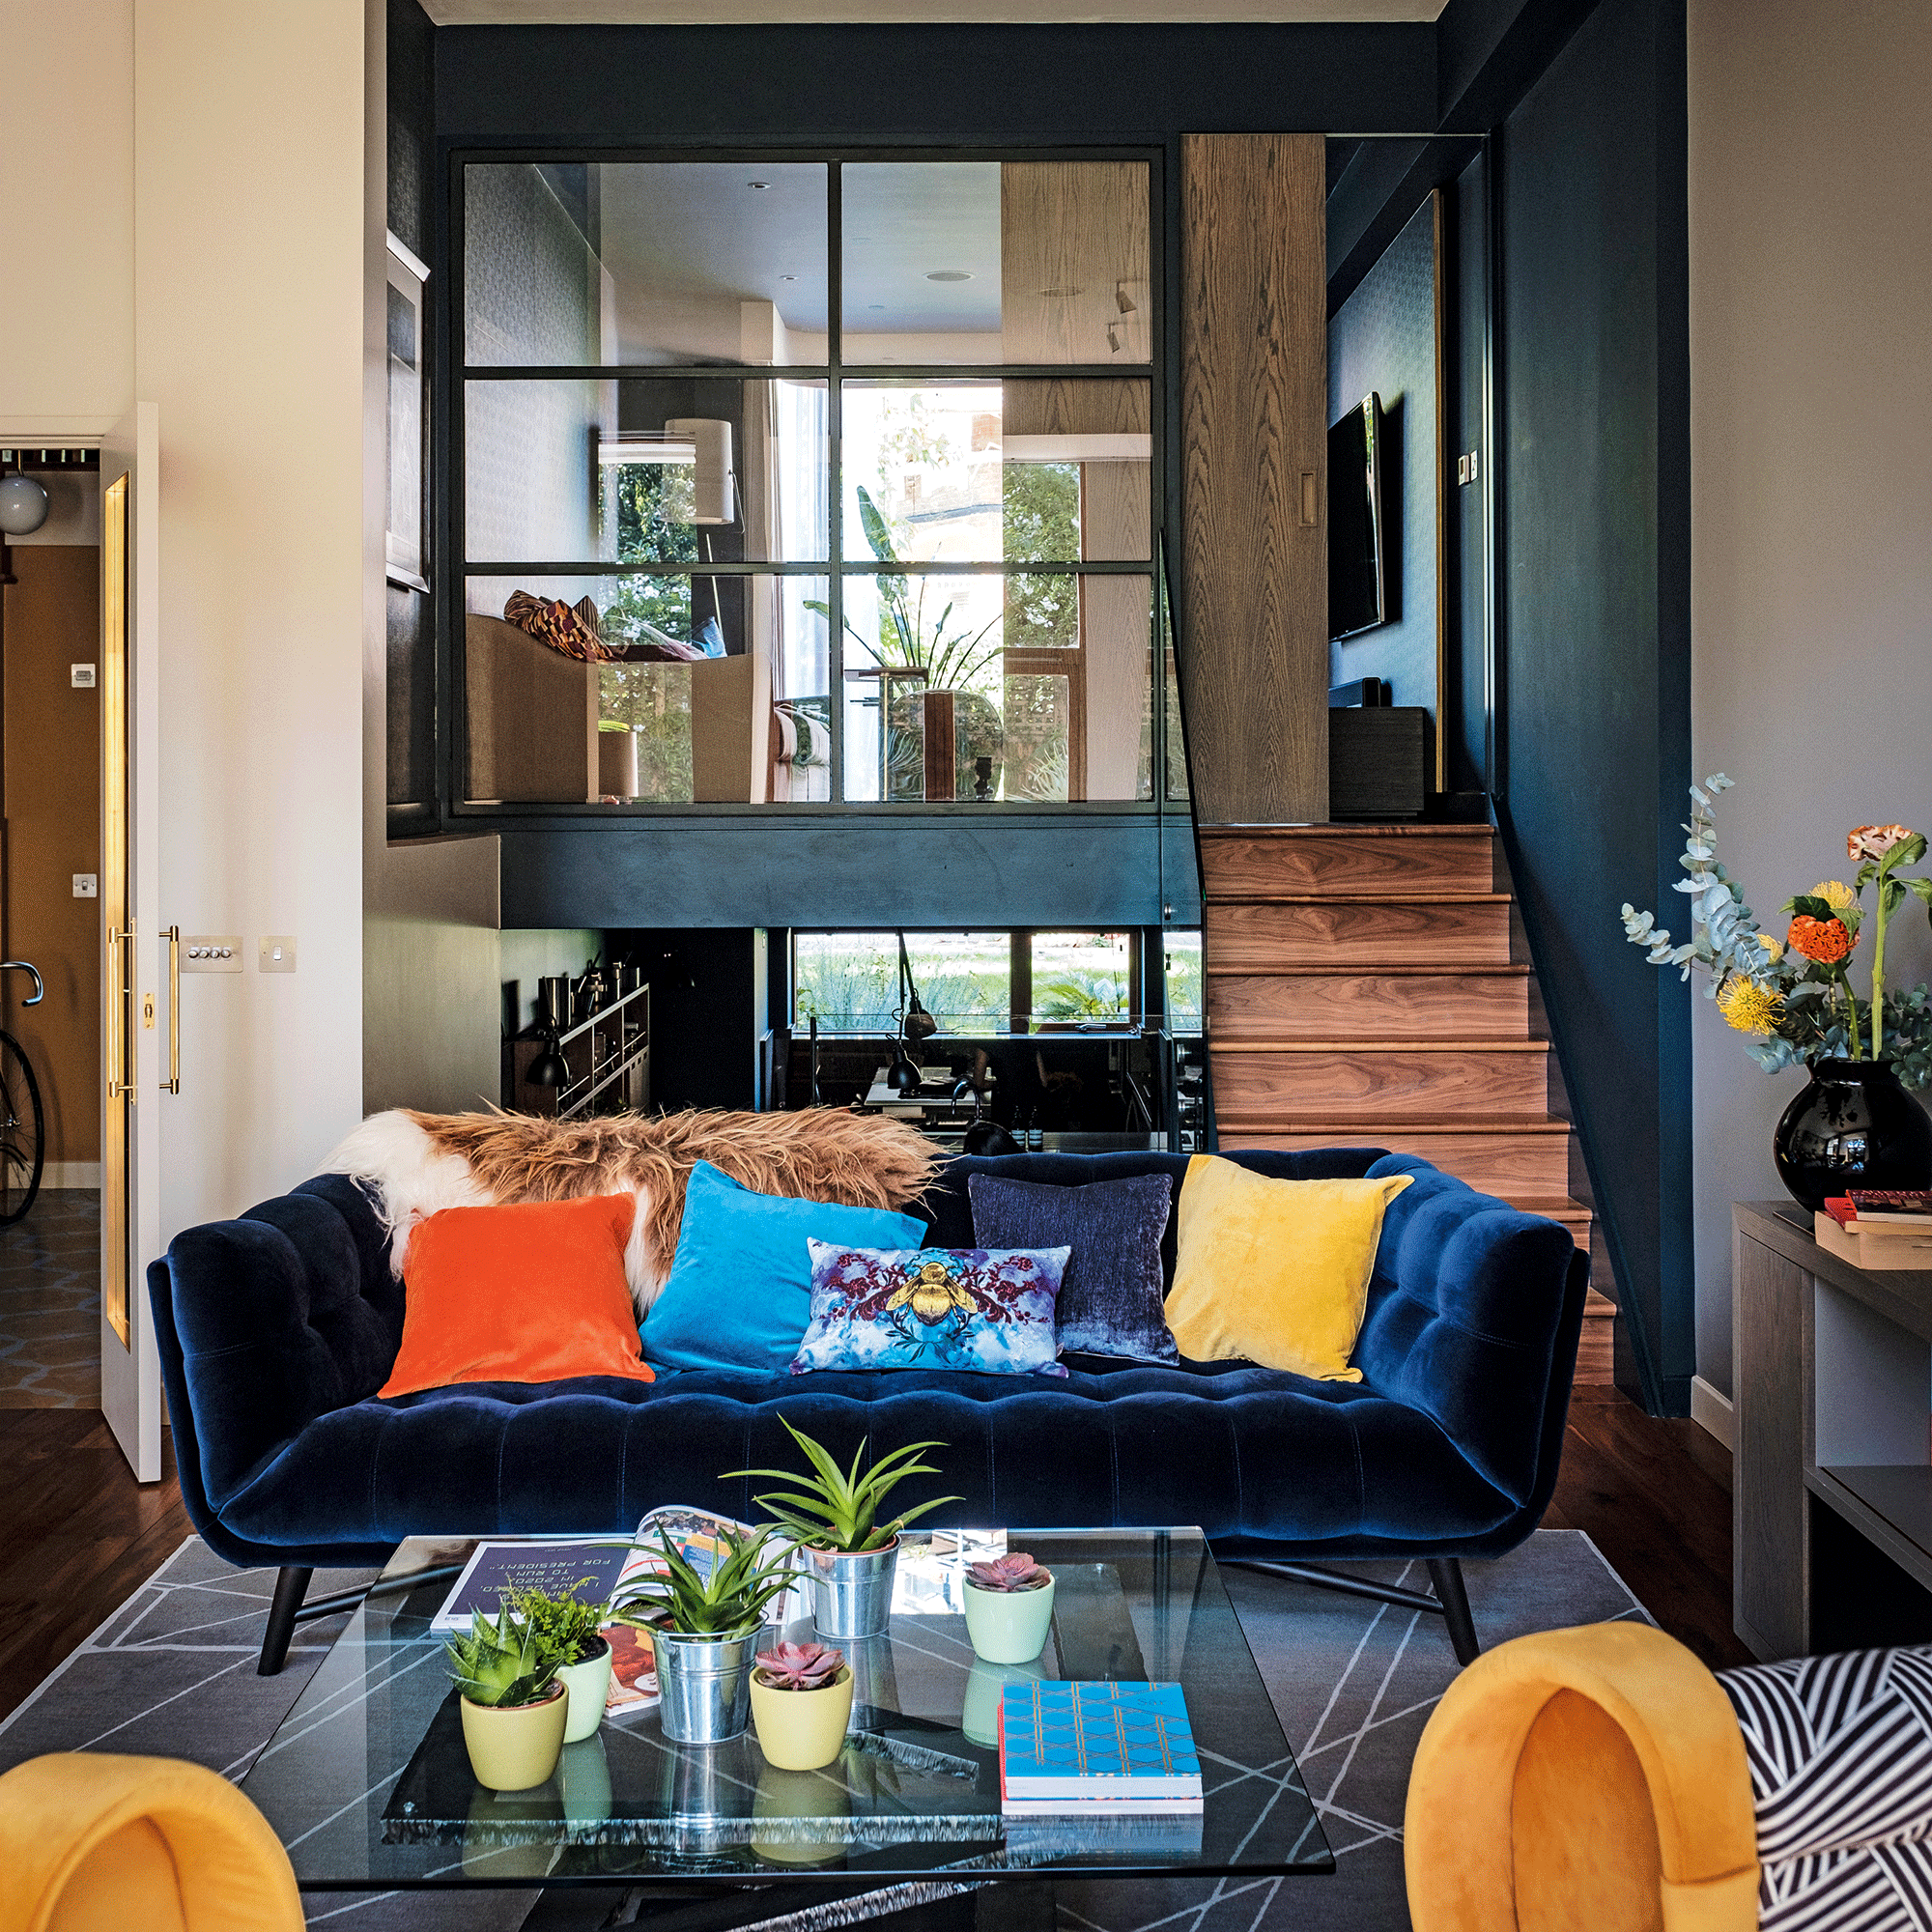 Black sofa with coloured cushions in front of glass clad mezzanine